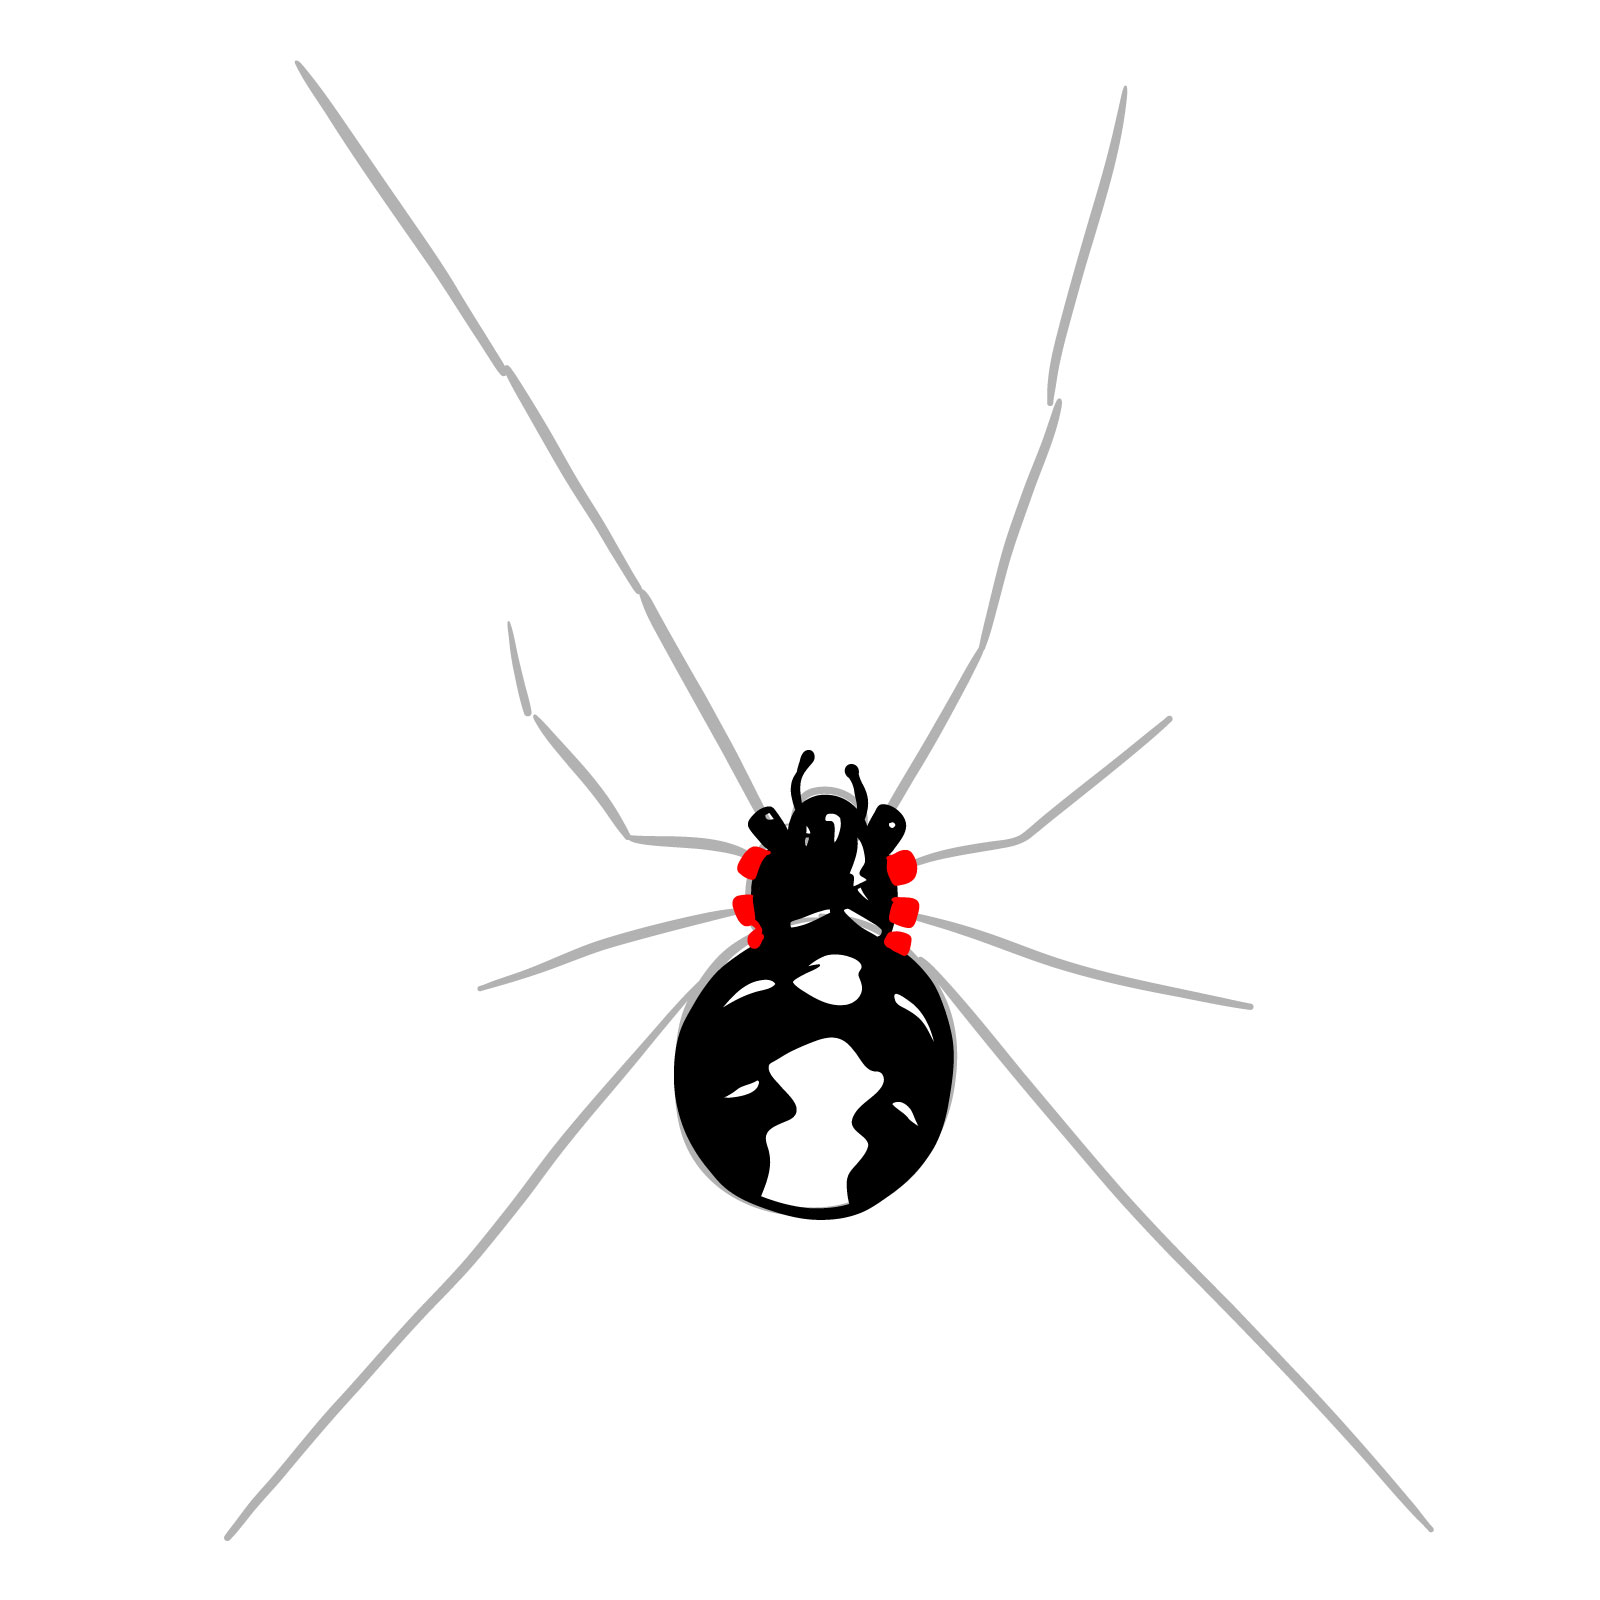 How to draw a Black Widow Spider - step 10